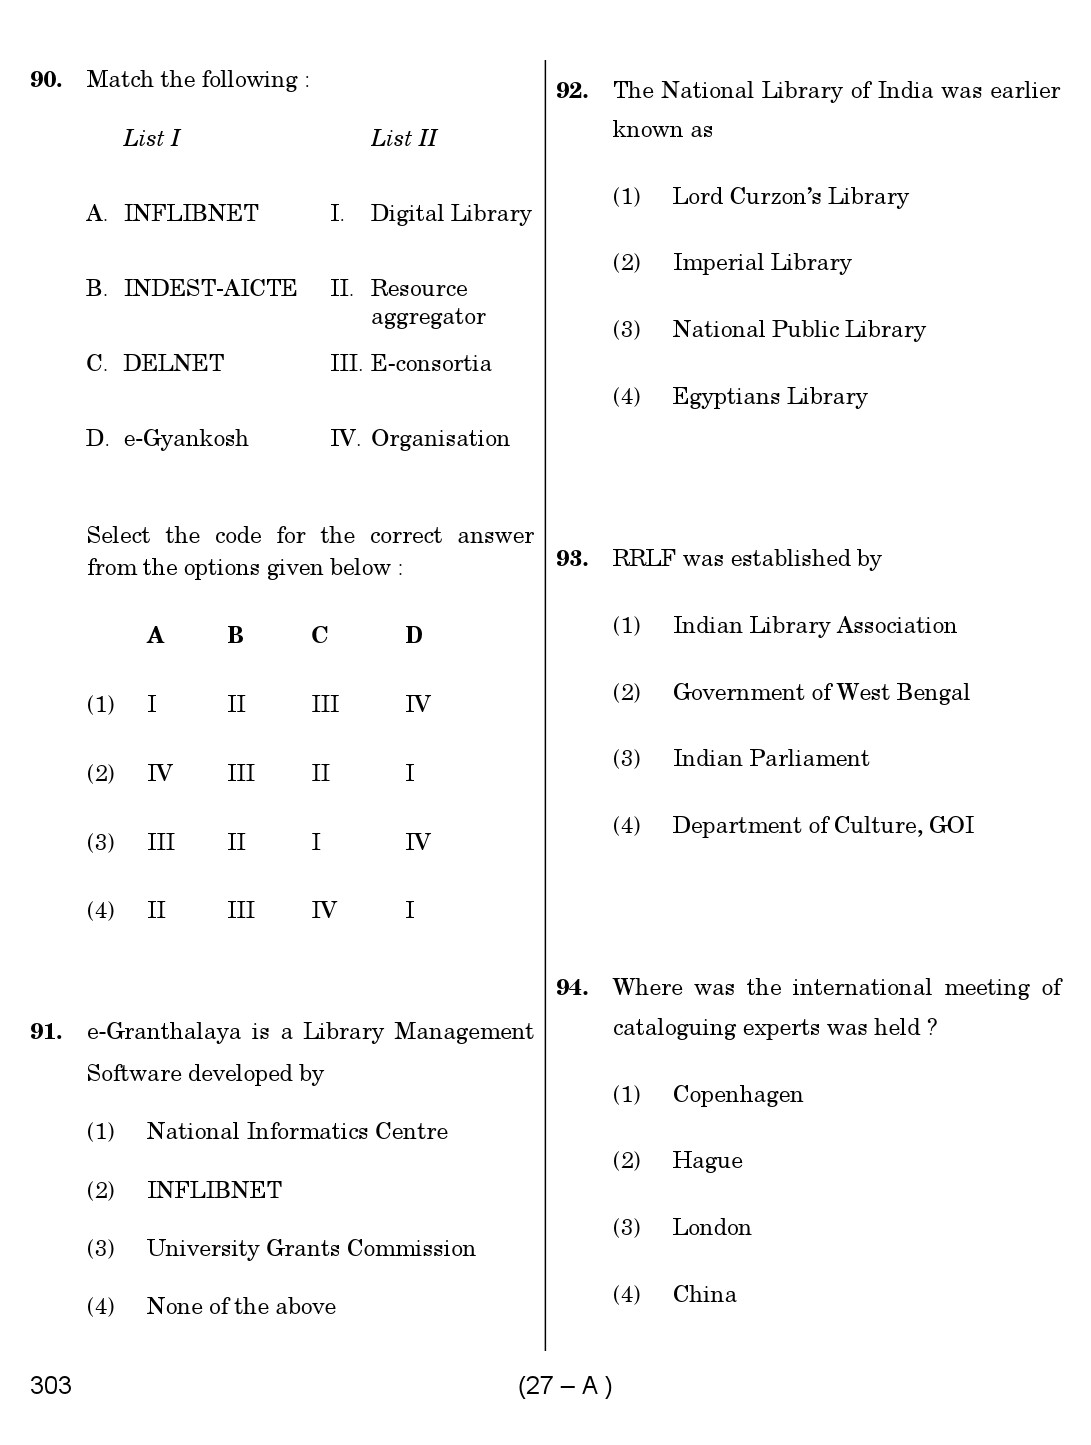 Karnataka PSC 303 Specific Paper II Librarian Exam Sample Question Paper 27